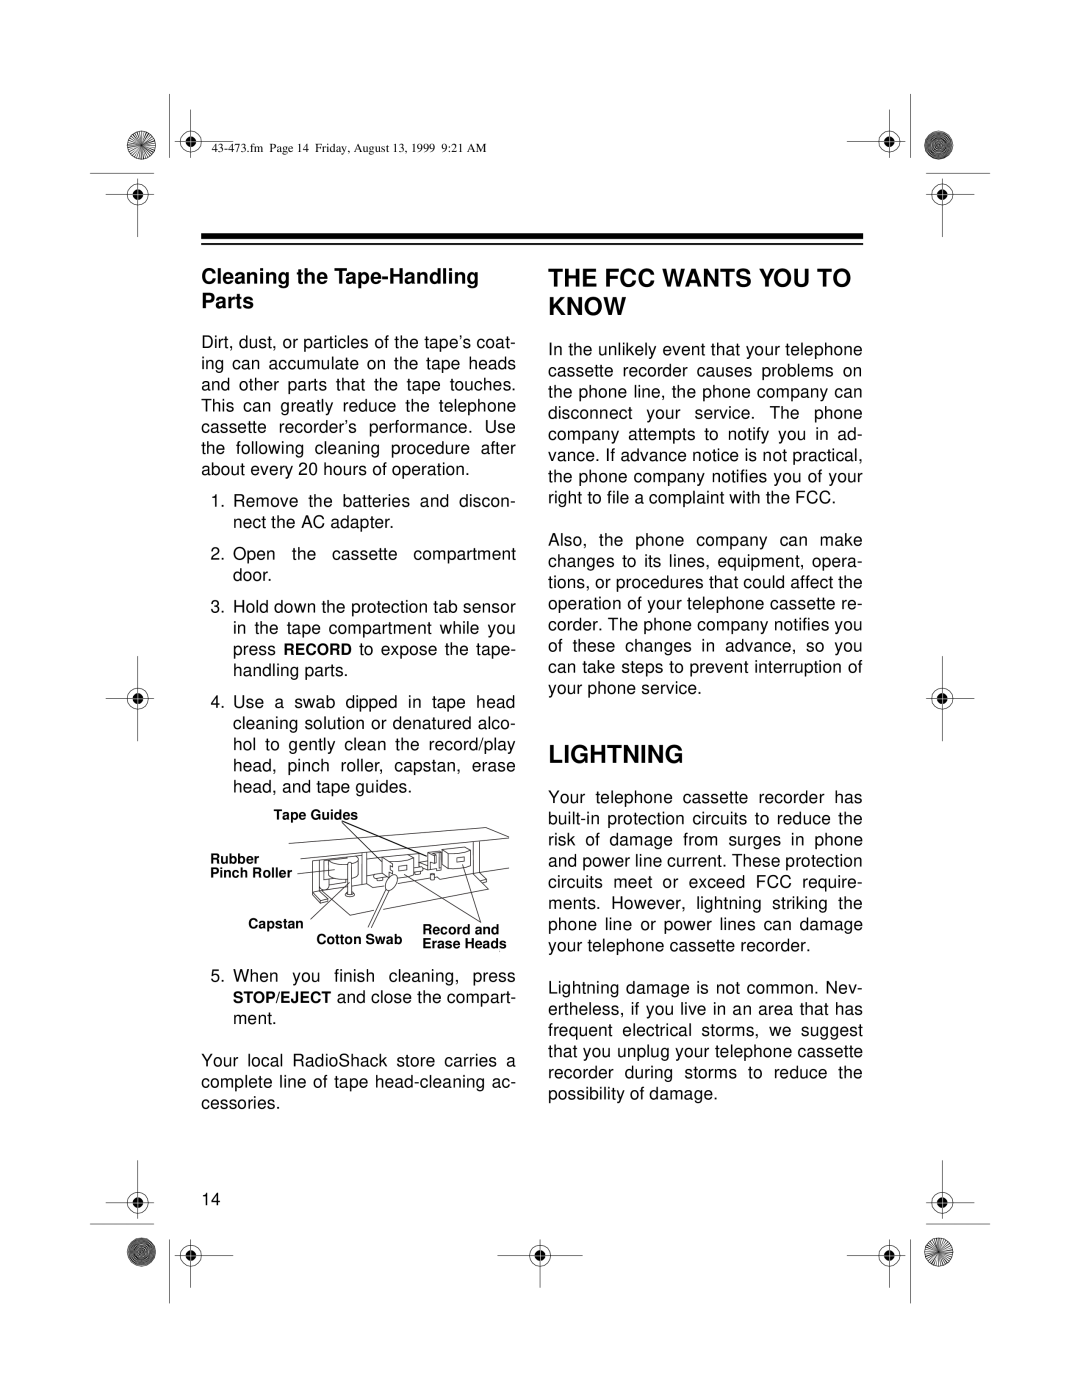 Roberts Radio TCR-200 owner manual The Fcc Wants You To Know, Lightning, Cleaning the Tape-HandlingParts 